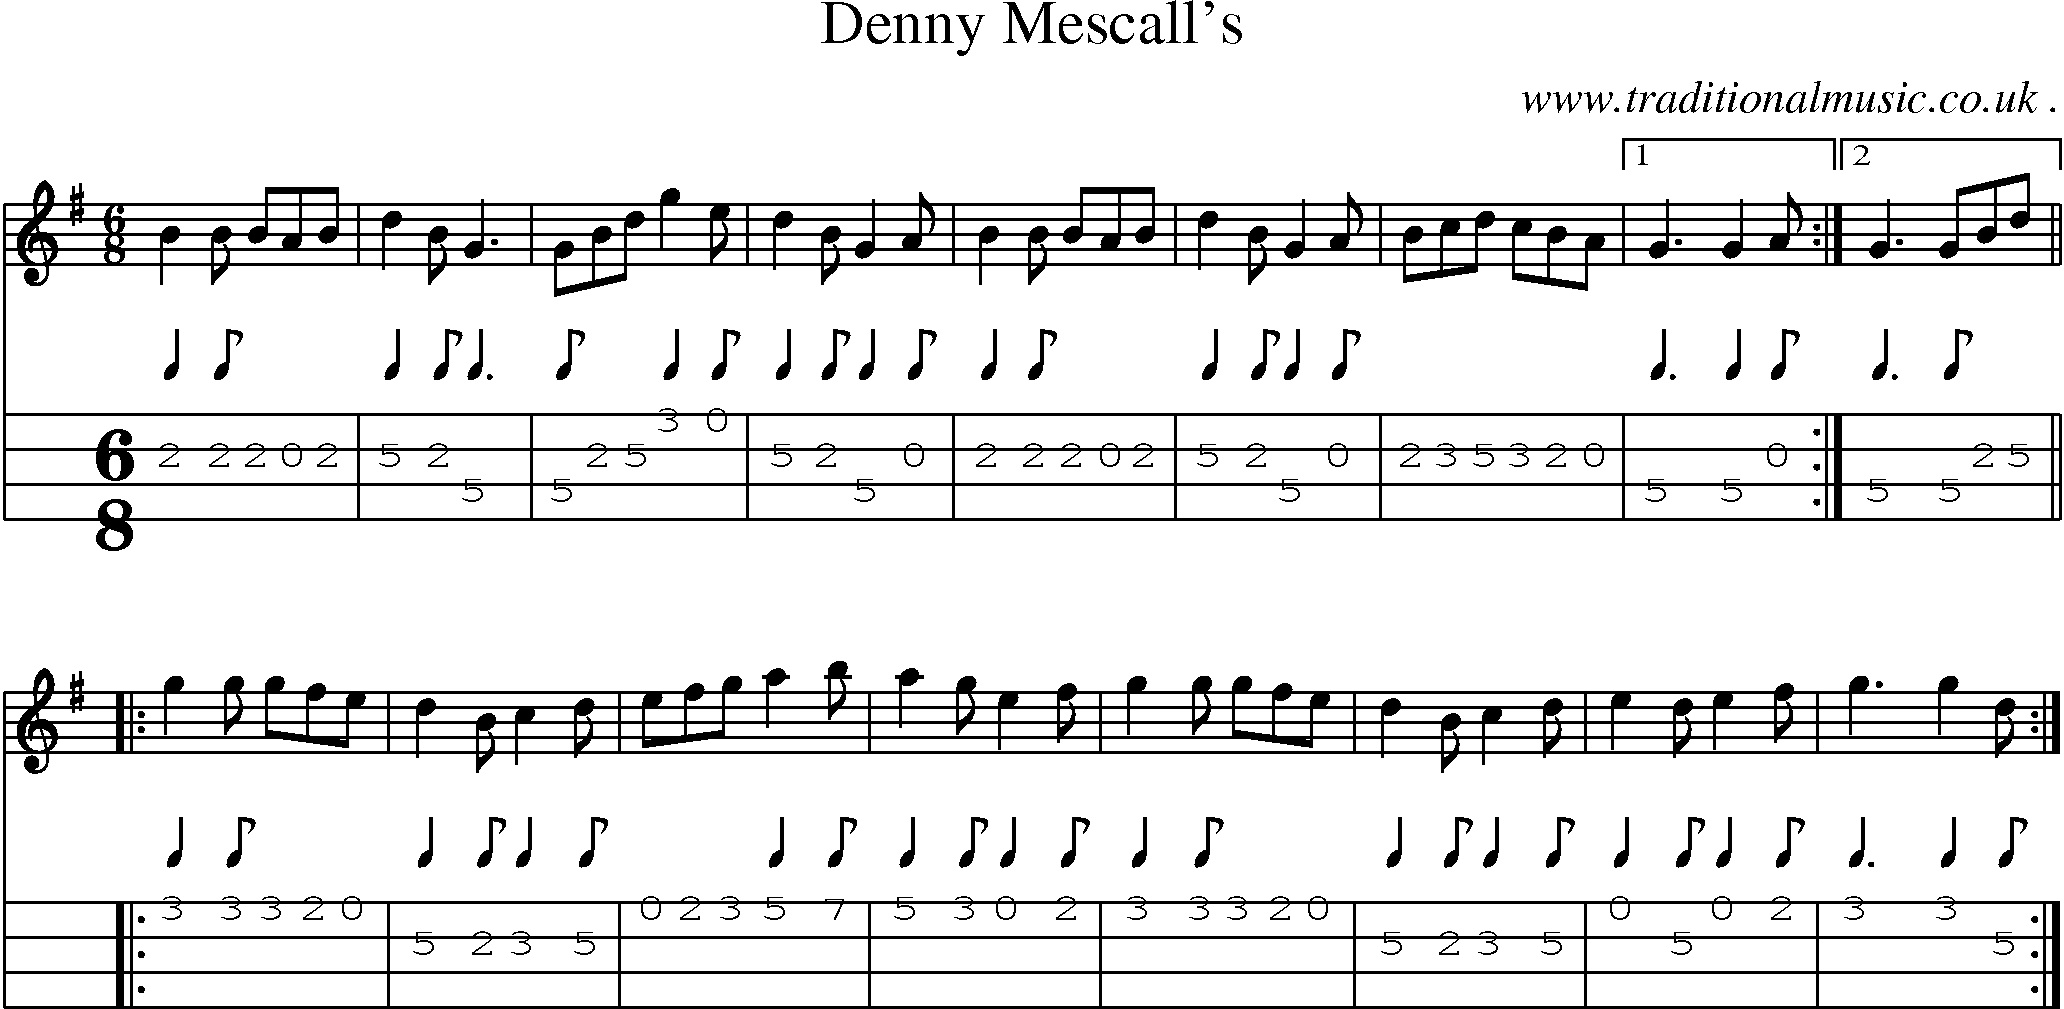 Sheet-Music and Mandolin Tabs for Denny Mescalls